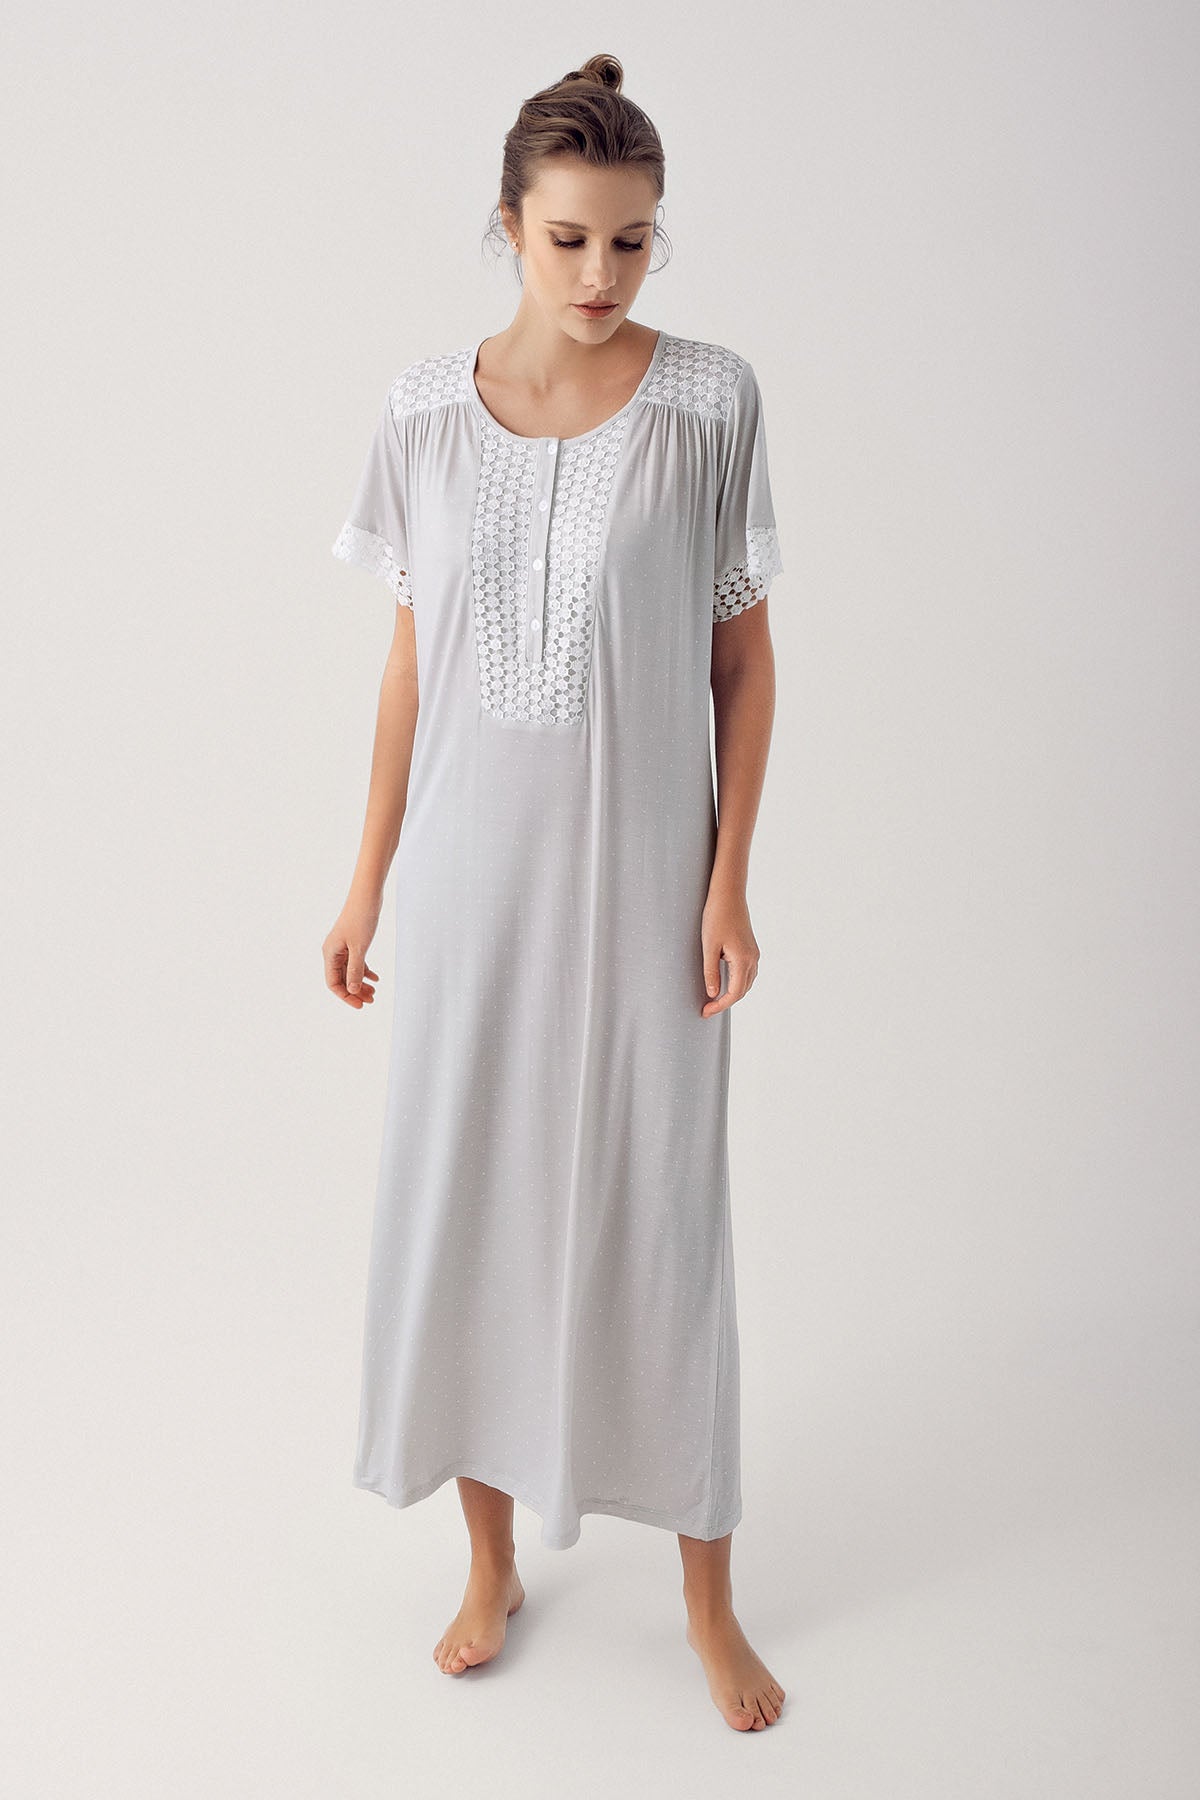 Shopymommy 14119 Tulle Lace Plus Size Maternity & Nursing Nightgown Grey